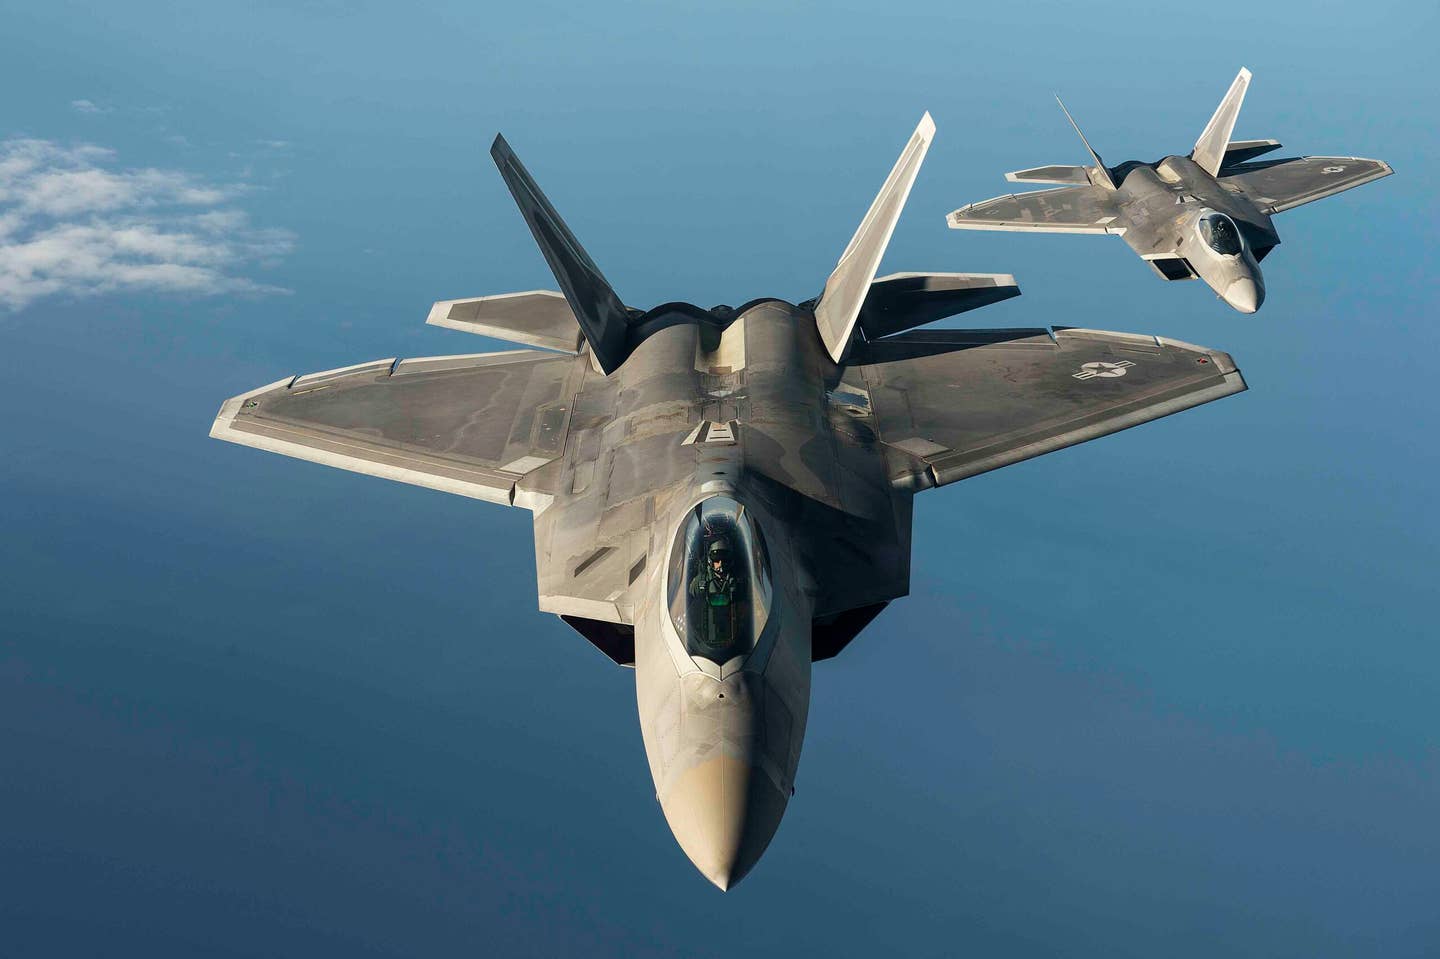 Two U.S. Air Force F-22 Raptors from the 95th Fighter Squadron, Tyndall Air Force Base, Fla., fly over the Baltic Sea, Sept. 4, 2015. <em>U.S. Air Force photo by Tech. Sgt. Jason Robertson</em>